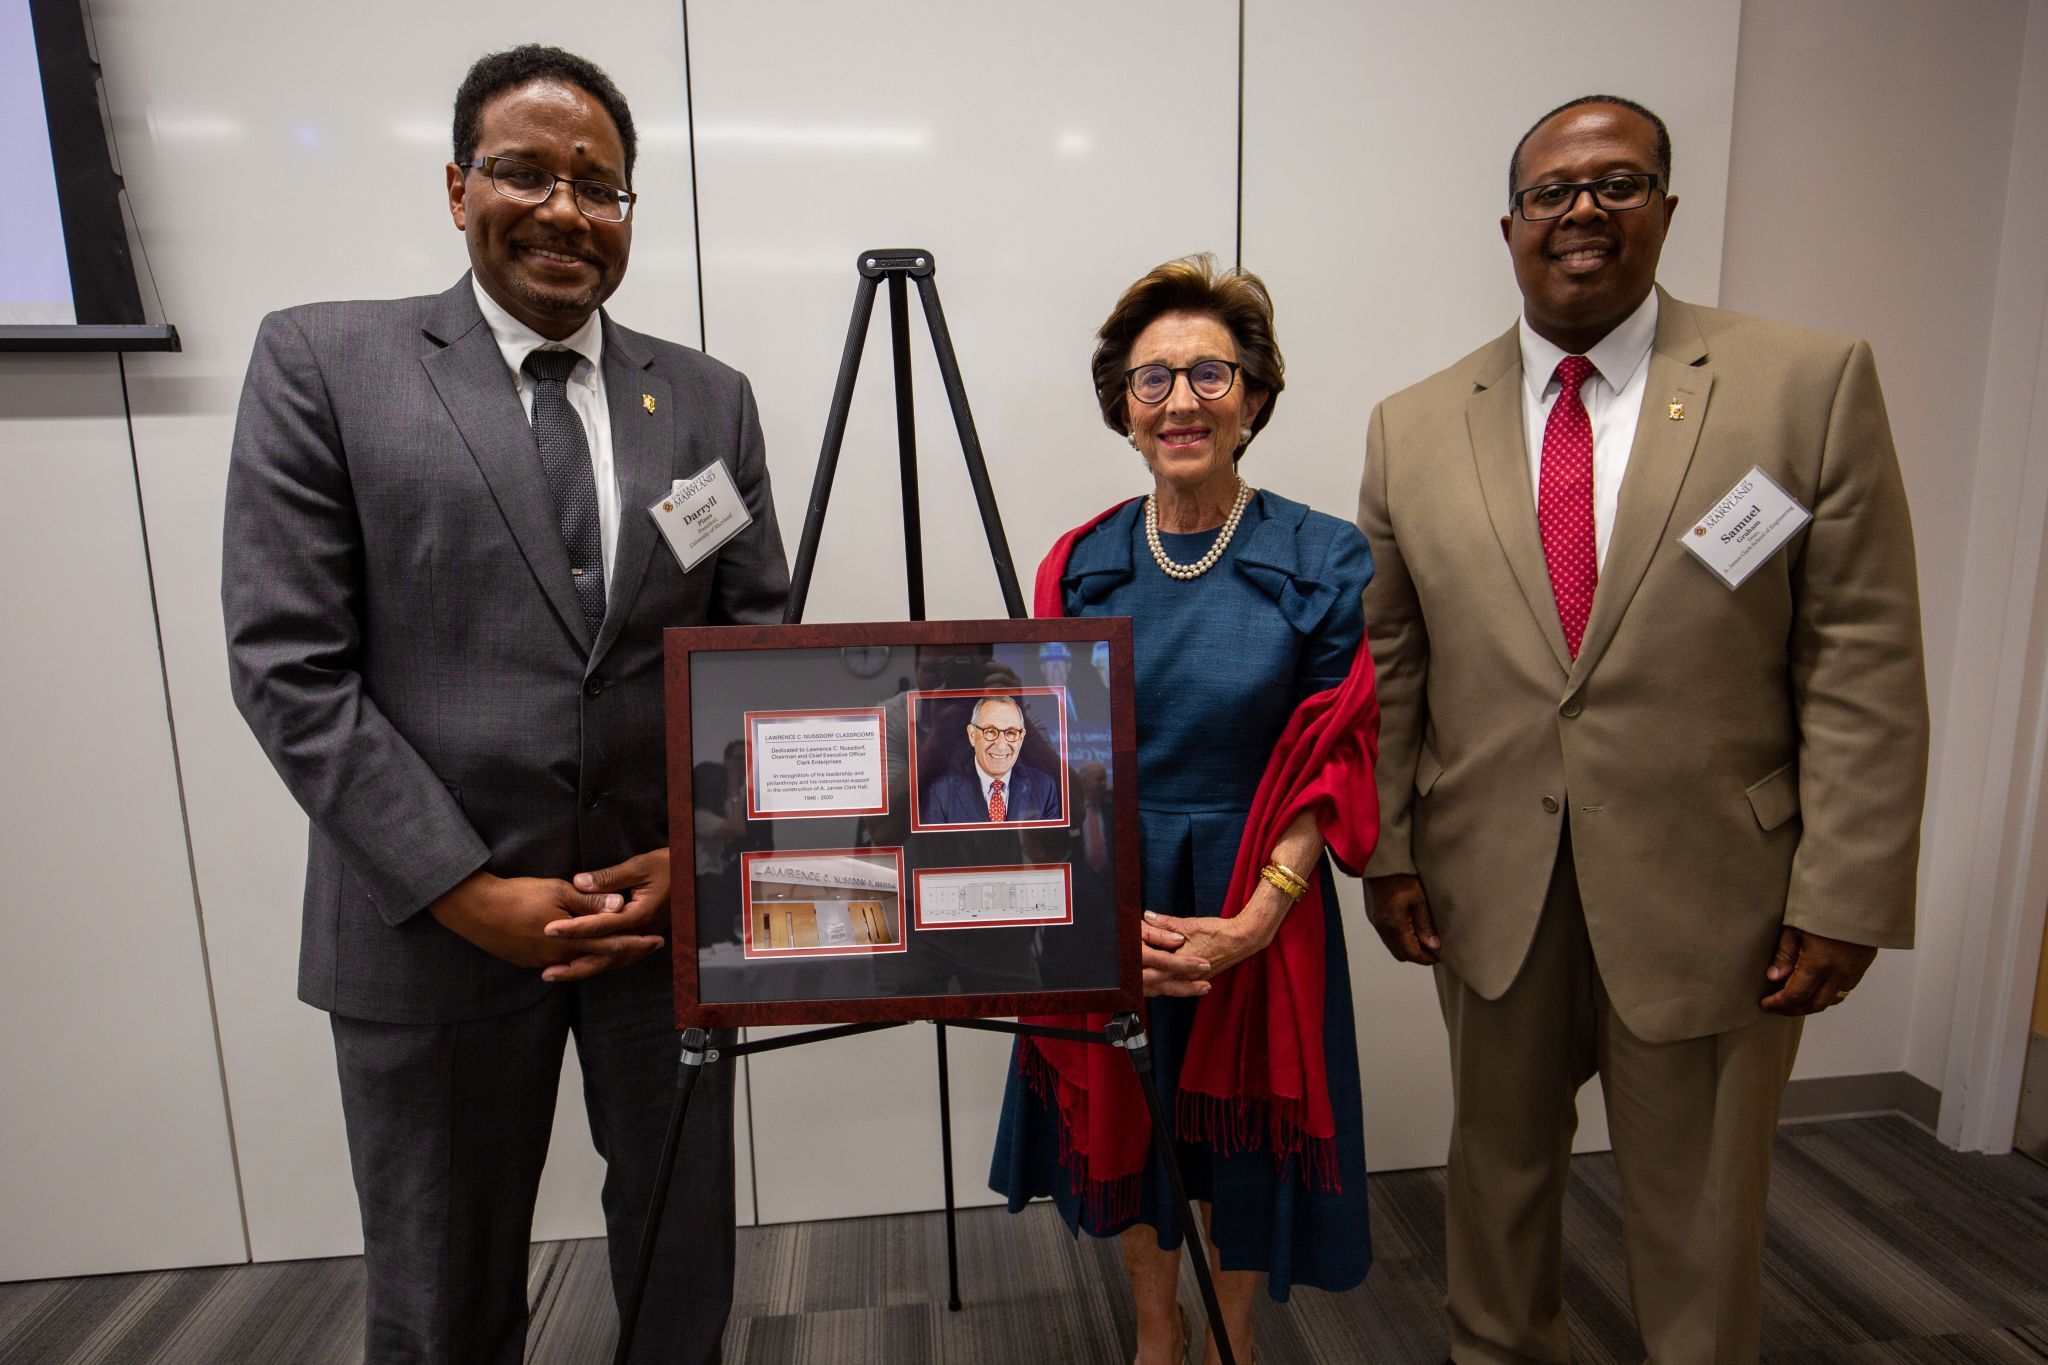 The University of Maryland dedicated the Lawrence C. Nussdorf Classrooms in honor of A. James & Alice B. Clark Foundation late board member, Larry Nussdorf.